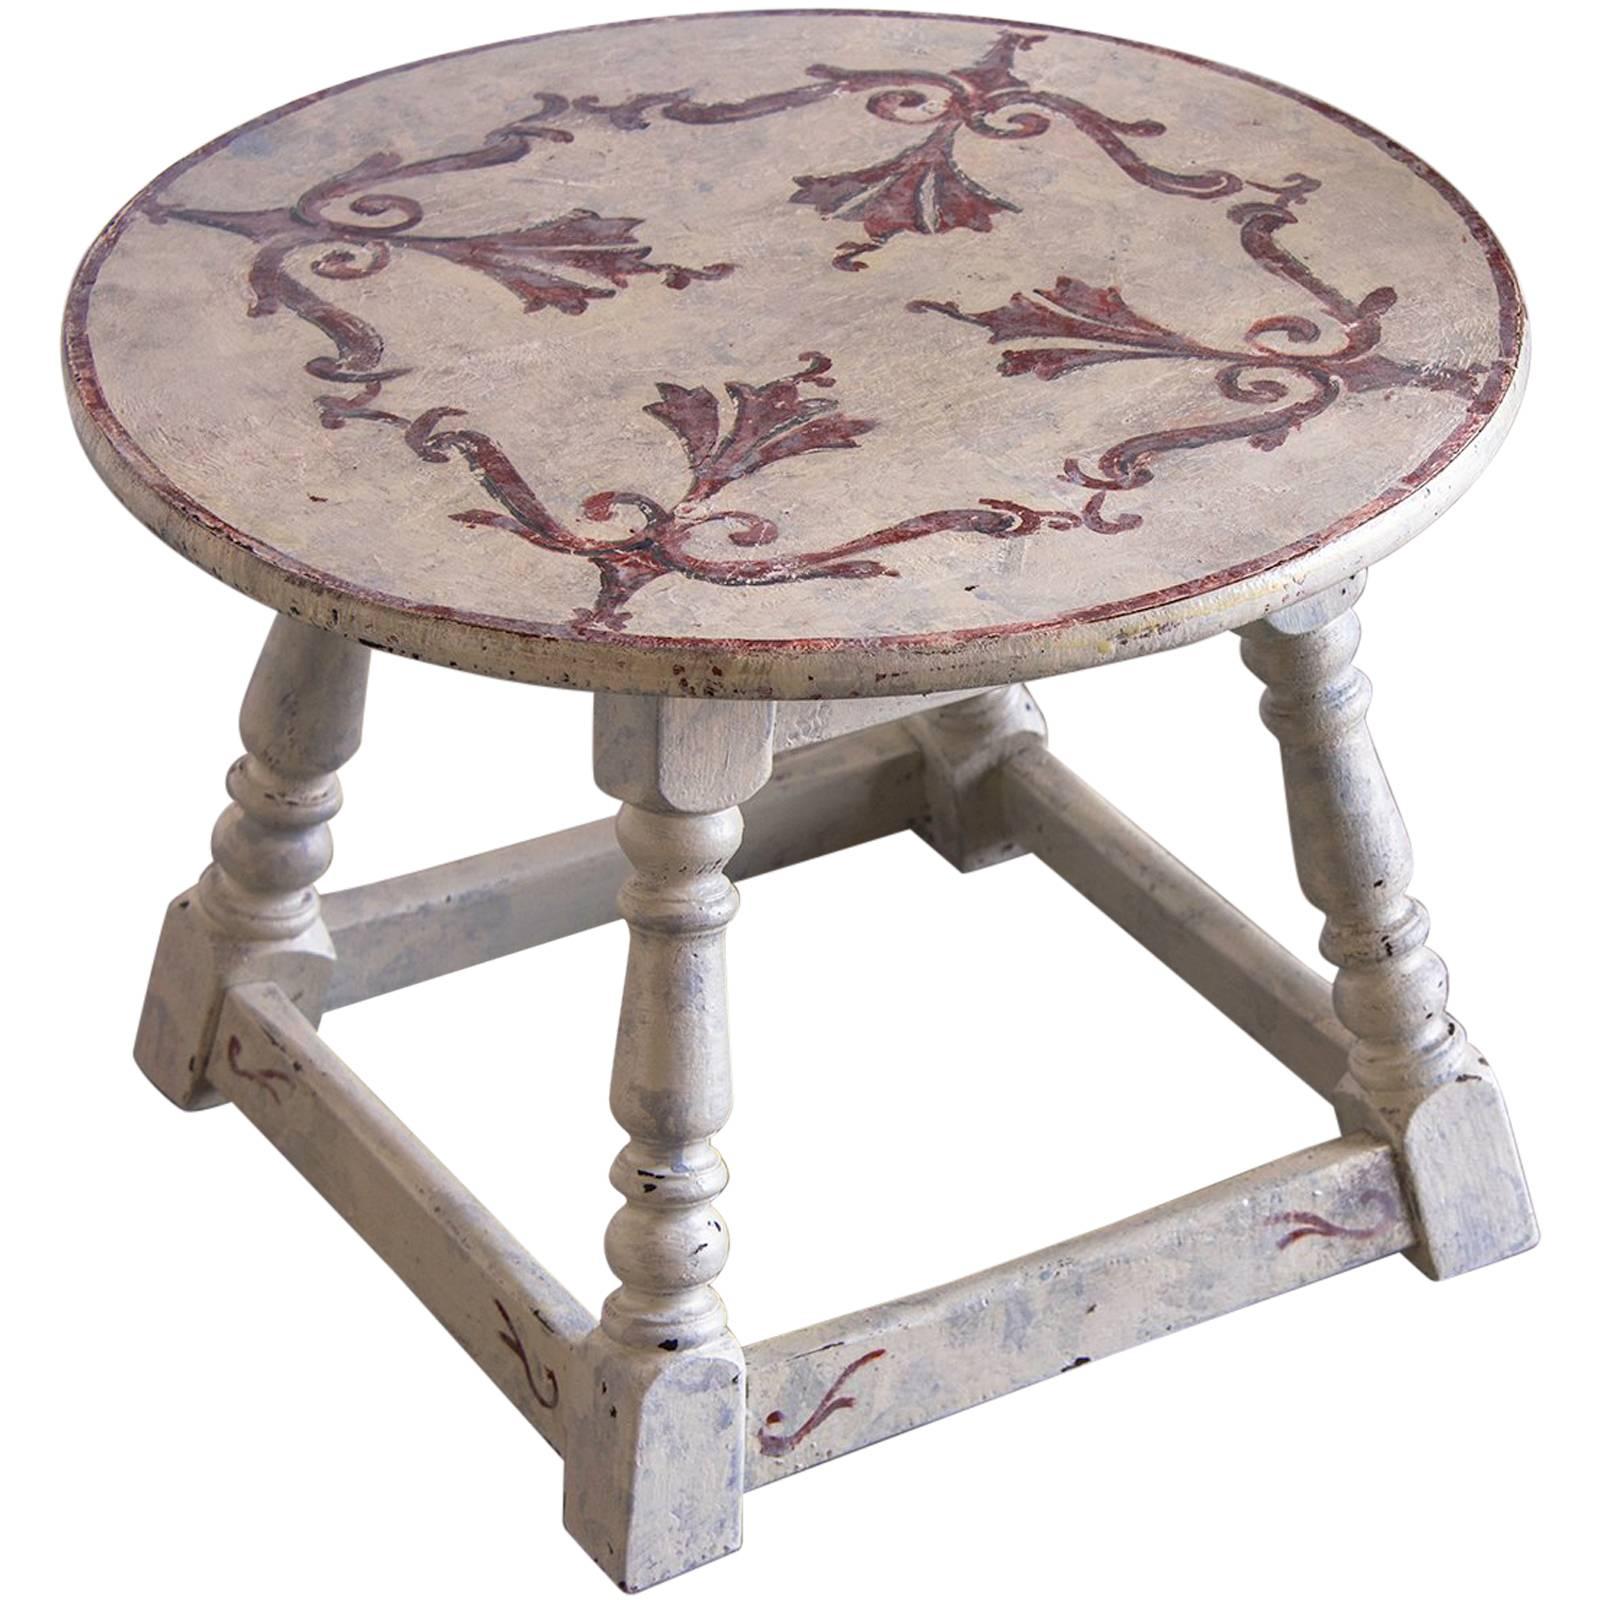 Antique French Round Painted Table, circa 1900